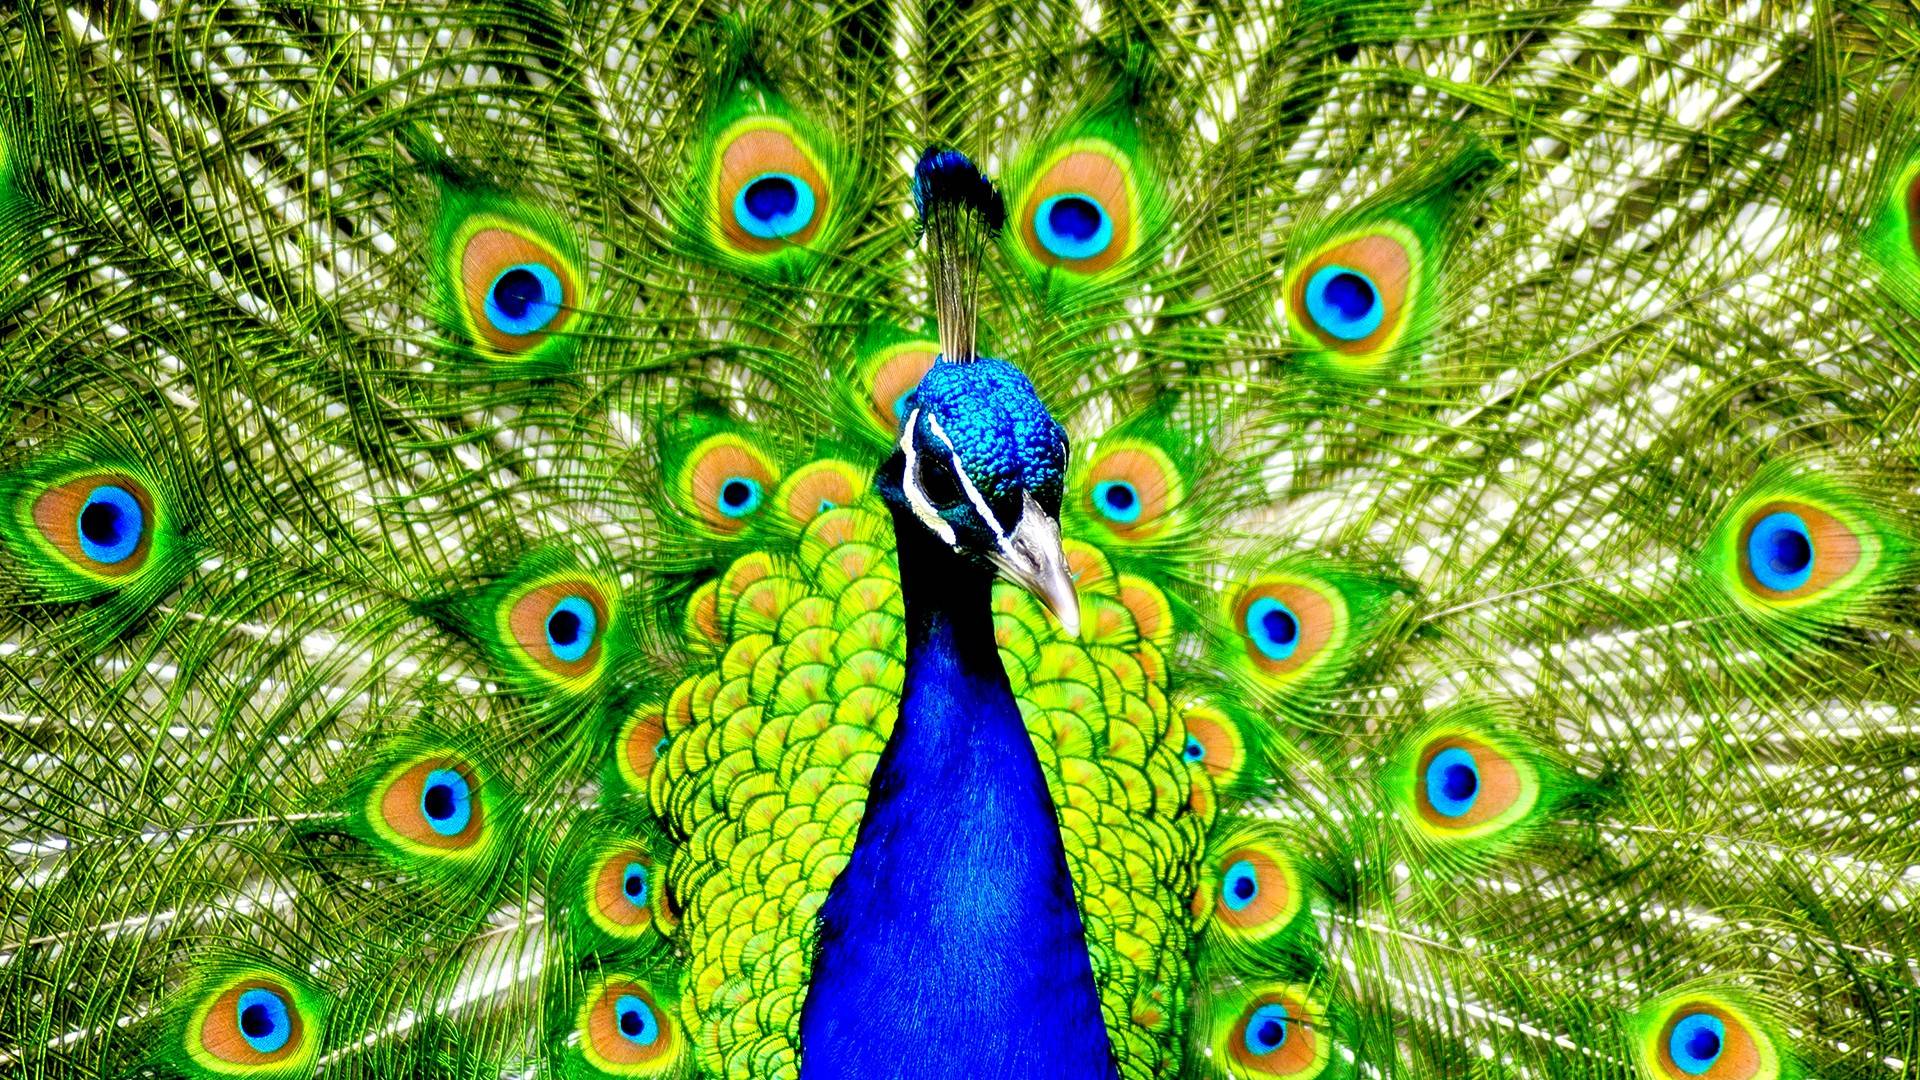 Wallpapers Peacock 1920x1080